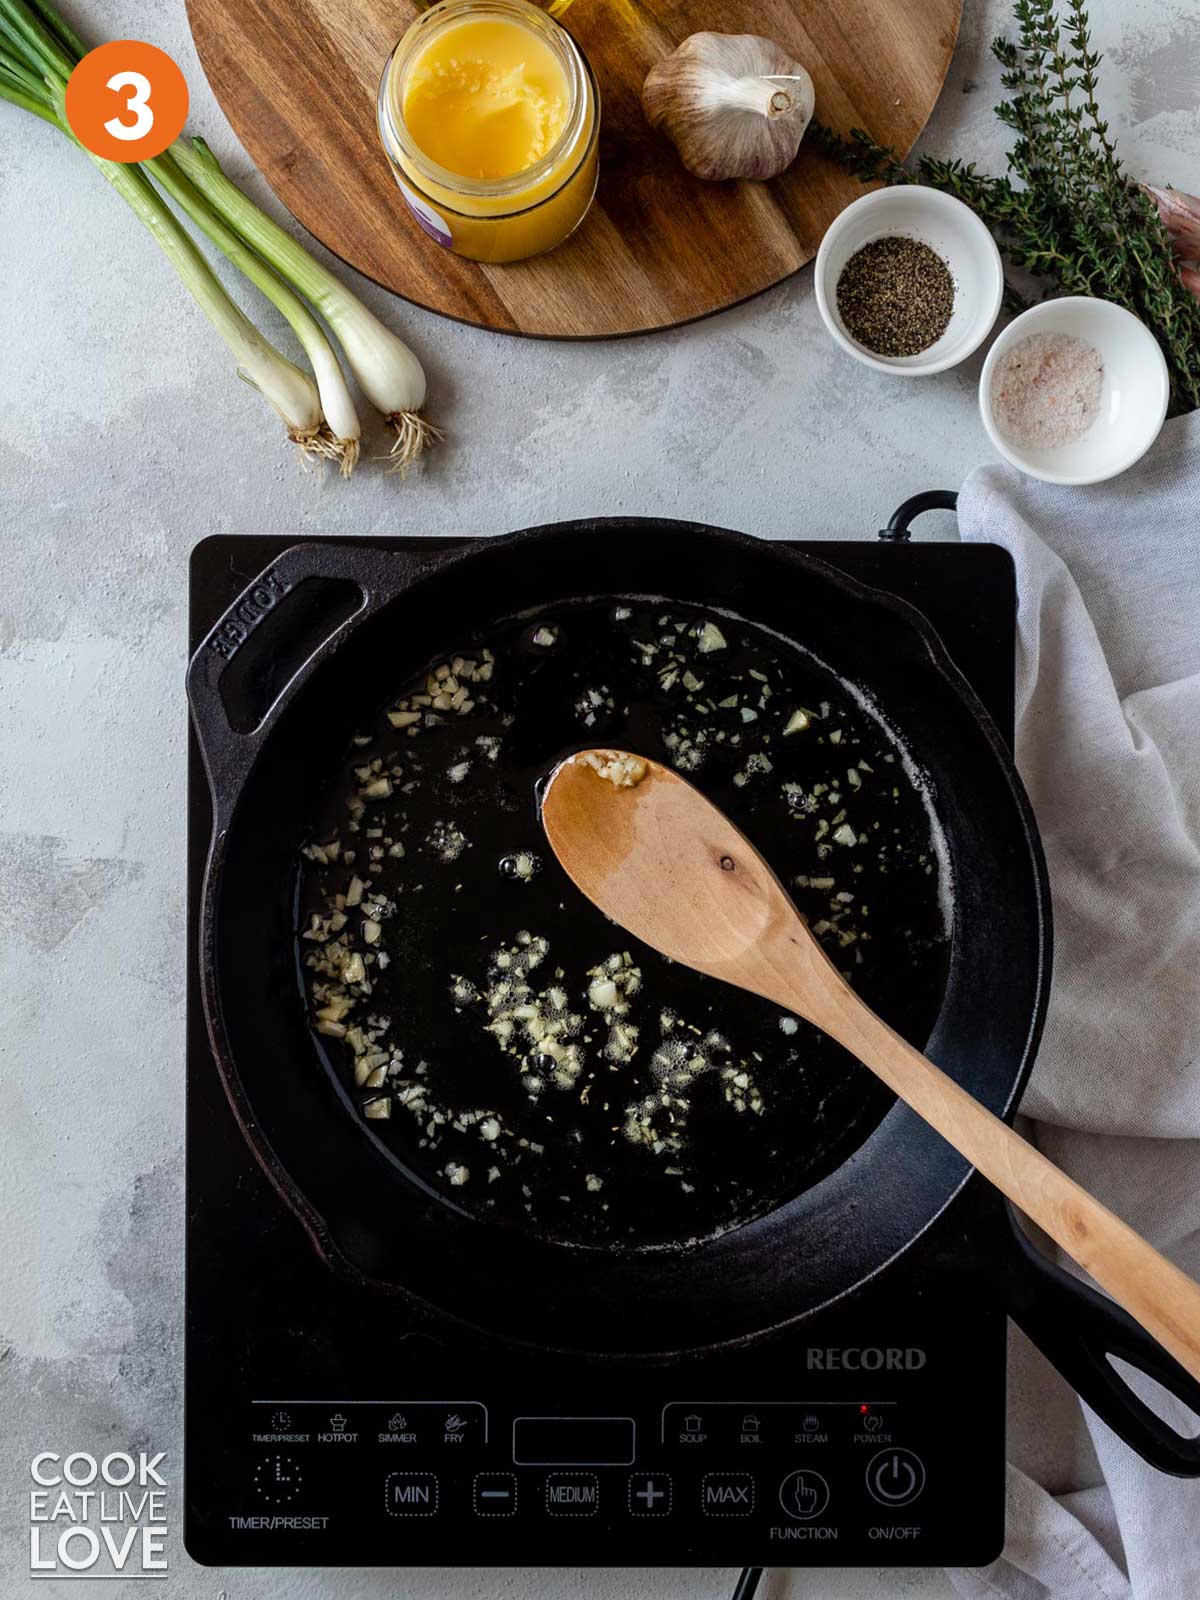 Garlic cooking in a skillet with a wooden spoon.